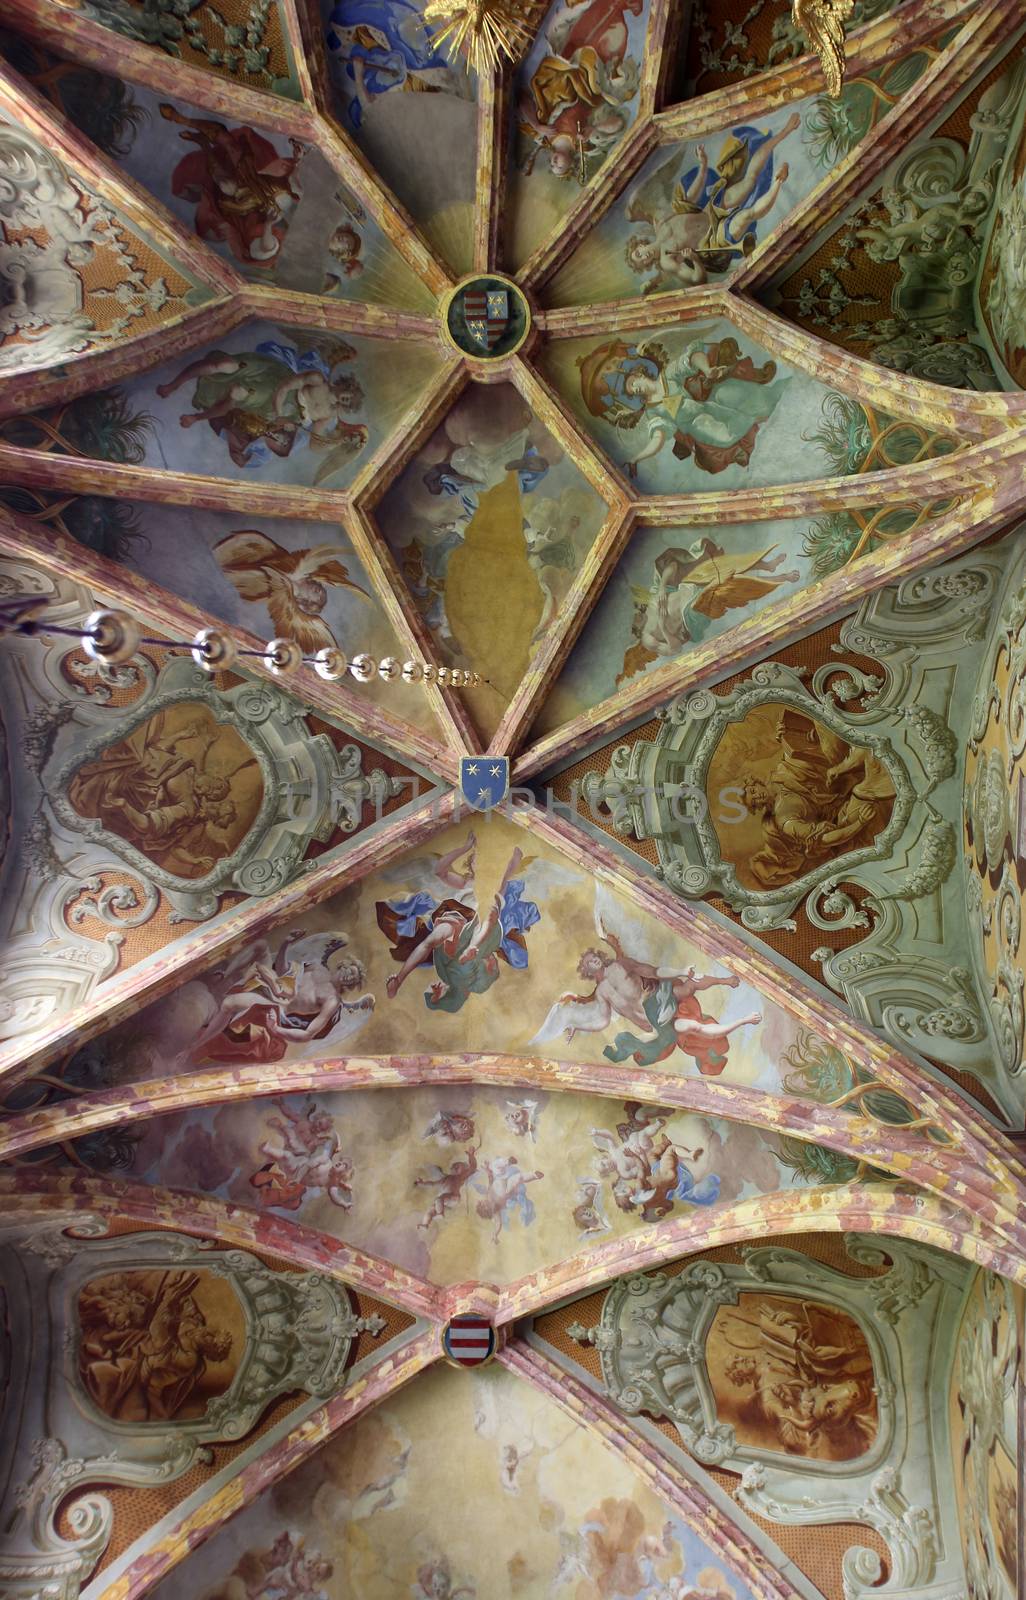 Fresco painting on the ceiling of the parish Church of the Immaculate Conception of the Virgin Mary in Lepoglava, Croatia